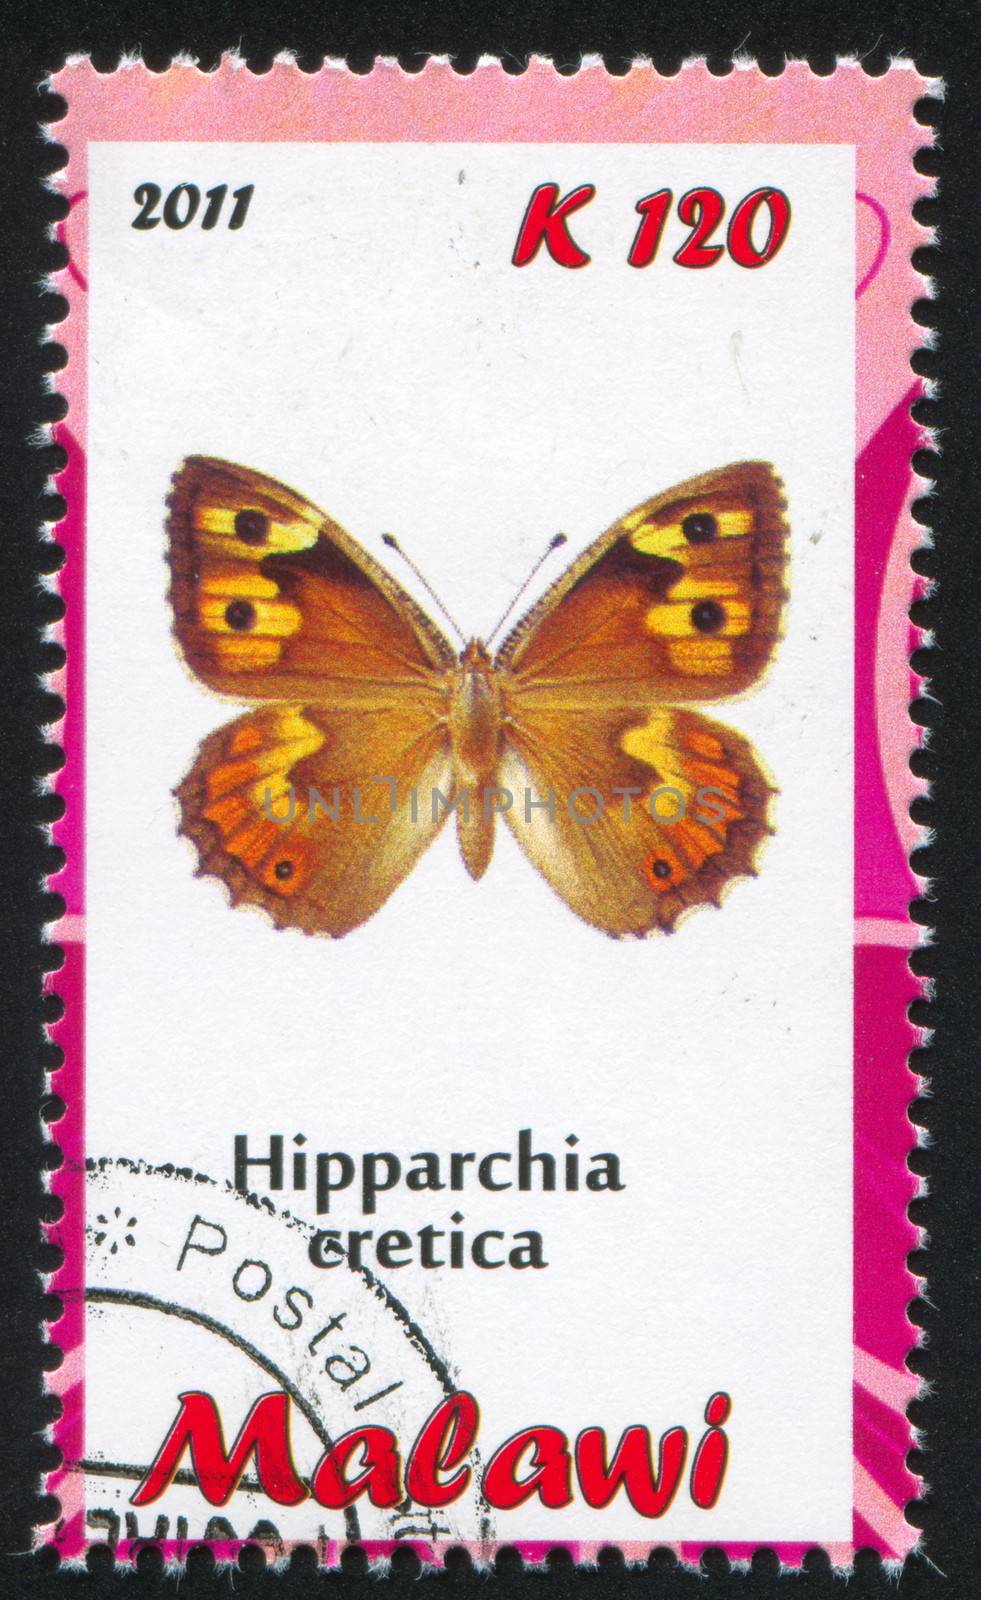 MALAWI - CIRCA 2011: stamp printed by Malawi, shows butterfly, circa 2011